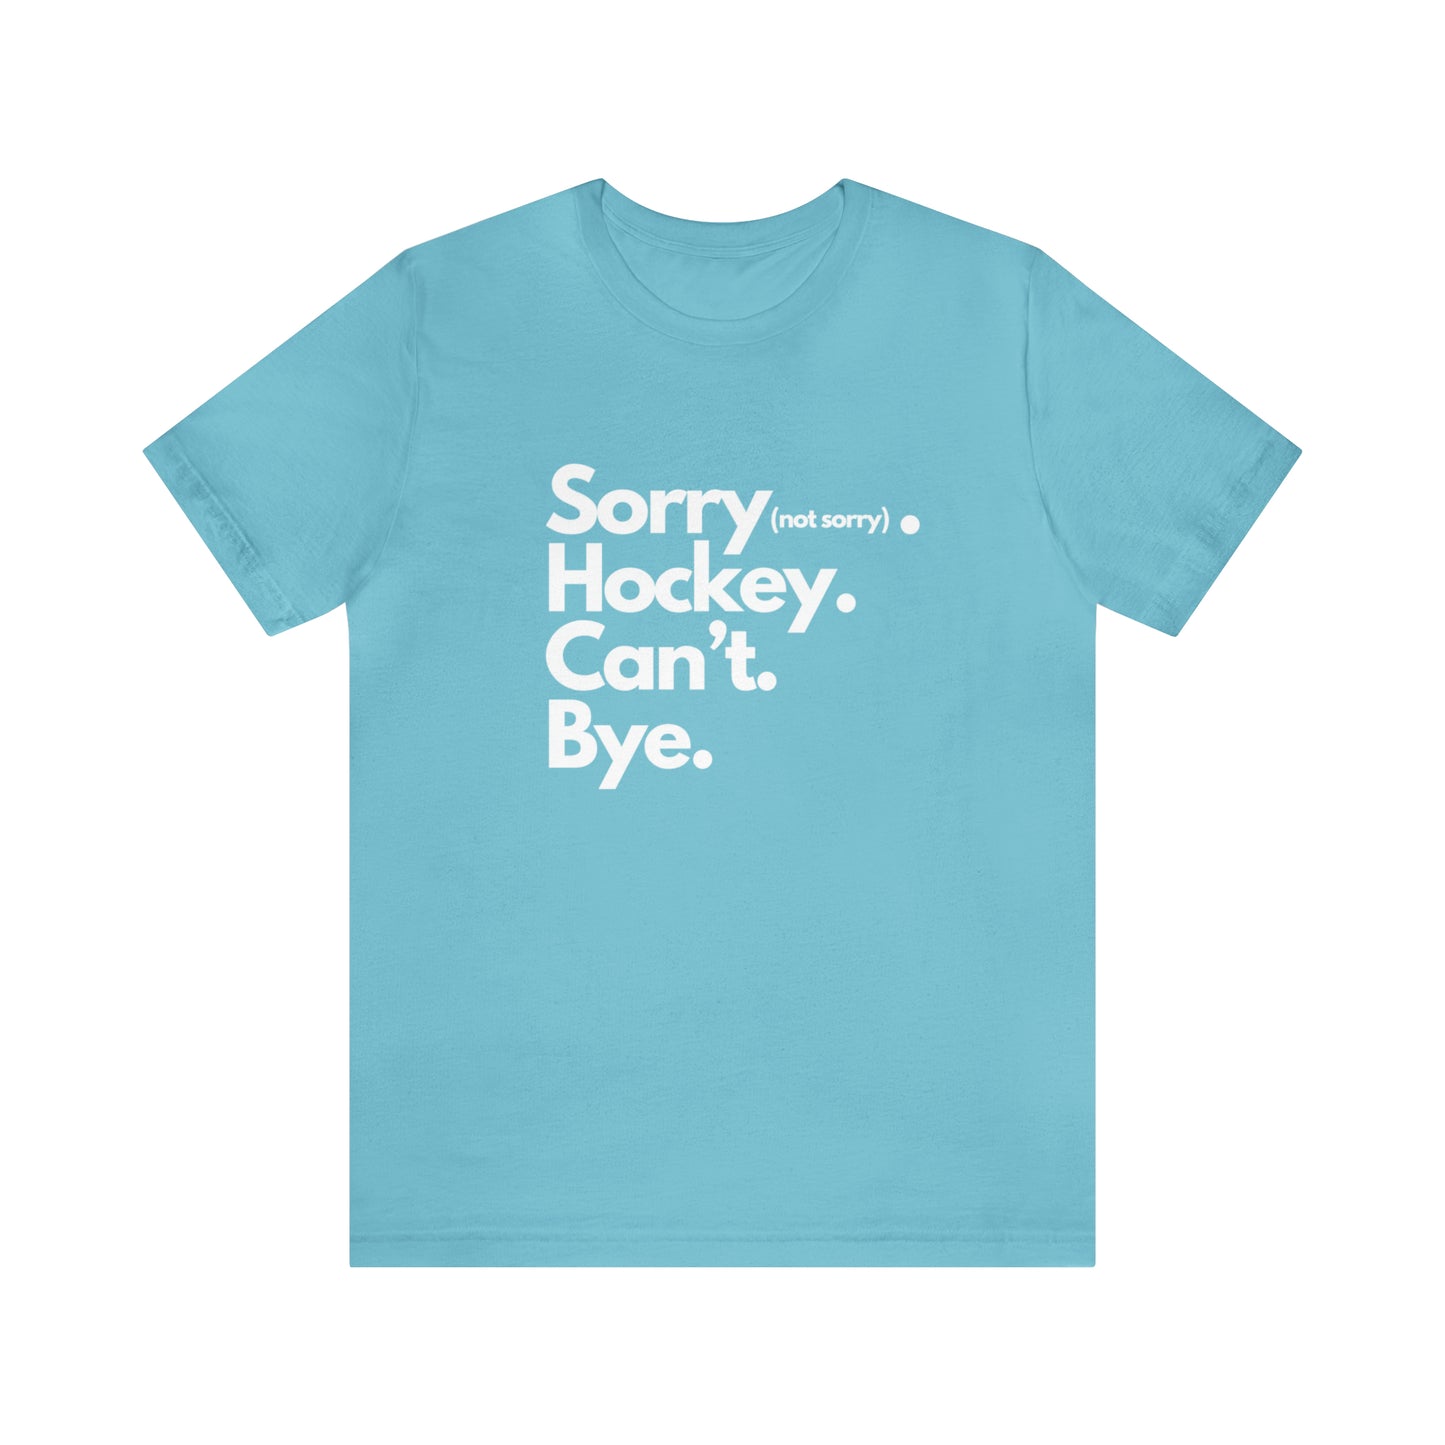 Sorry. Can't. Unisex Bella + Canvas Short Sleeve Tee